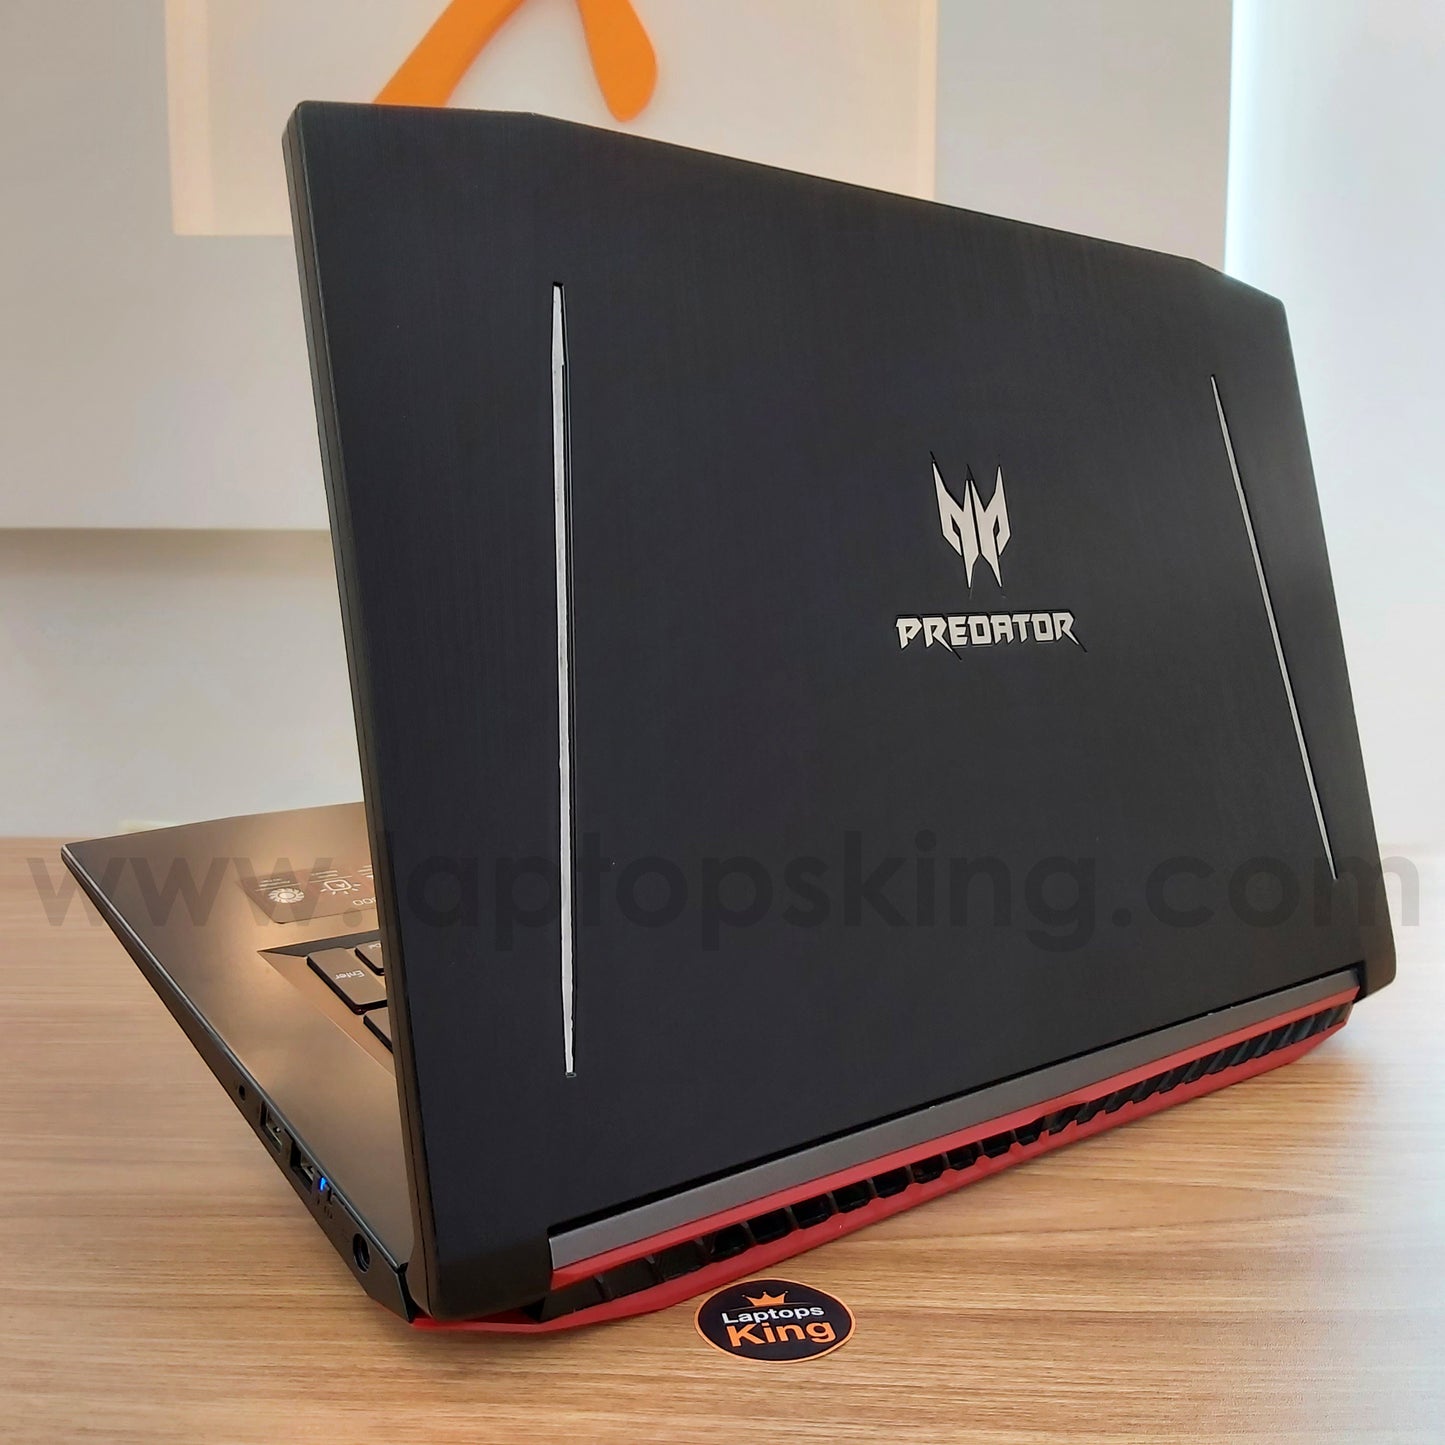 Acer Predator Helios 300 PH317-51 i7-7700HQ Gtx 1060 17.3" Gaming Laptop (Used Very Clean)